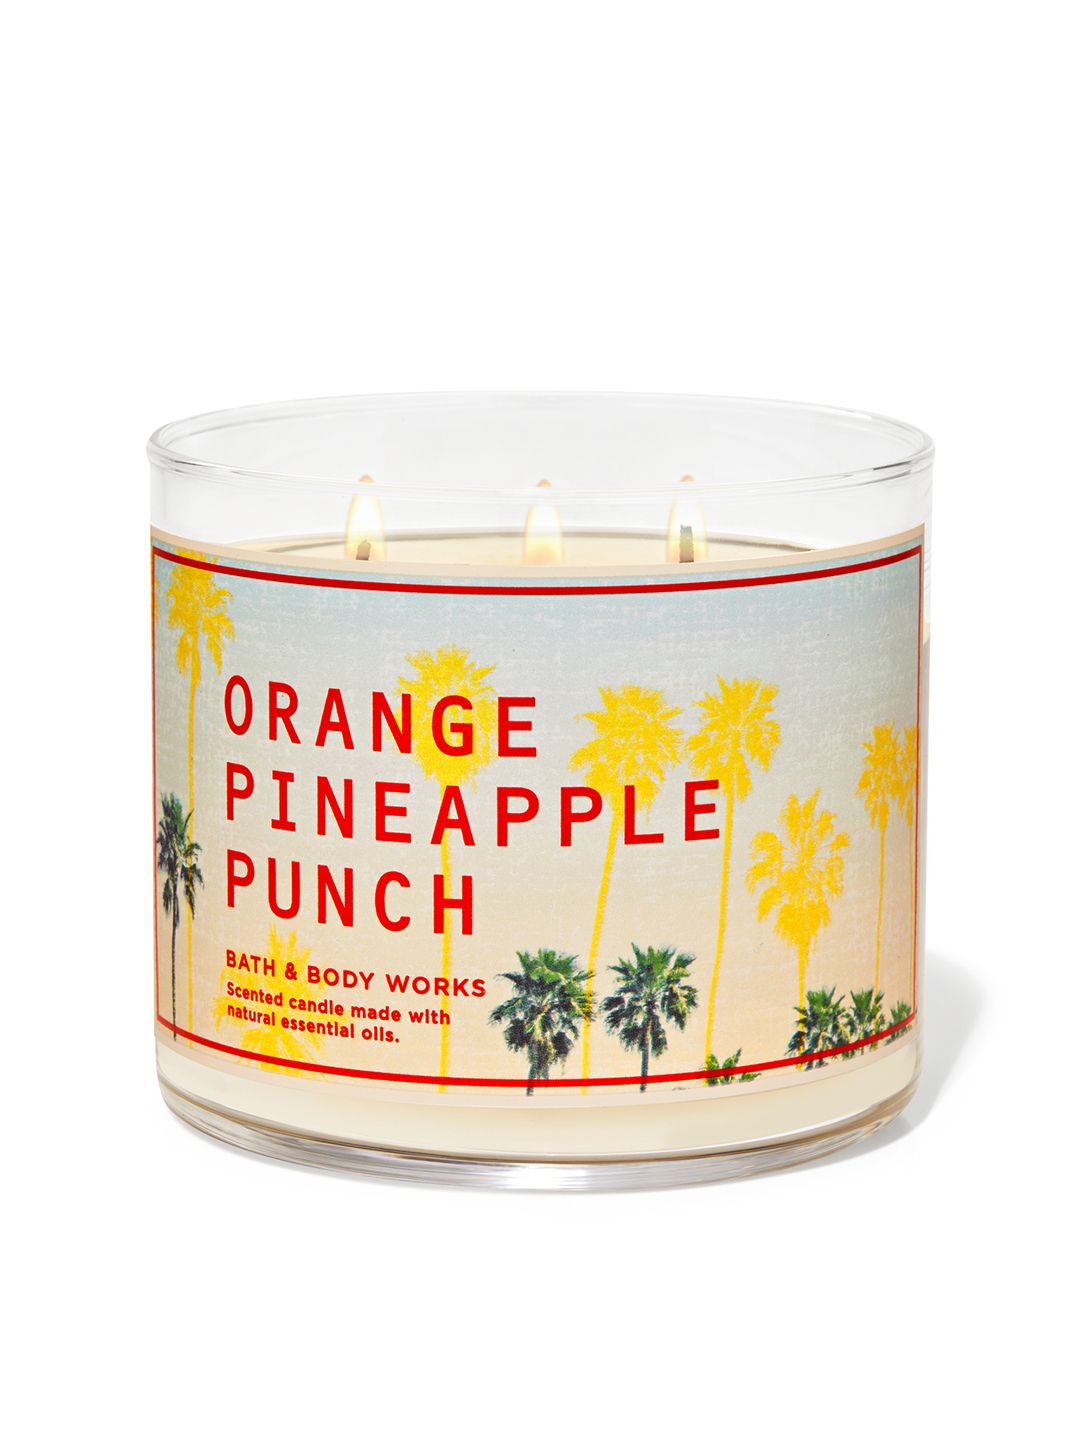 Bath & Body Works Orange Pineapple Punch 3-Wick Scented Candle with Essential Oils - 411g Price in India